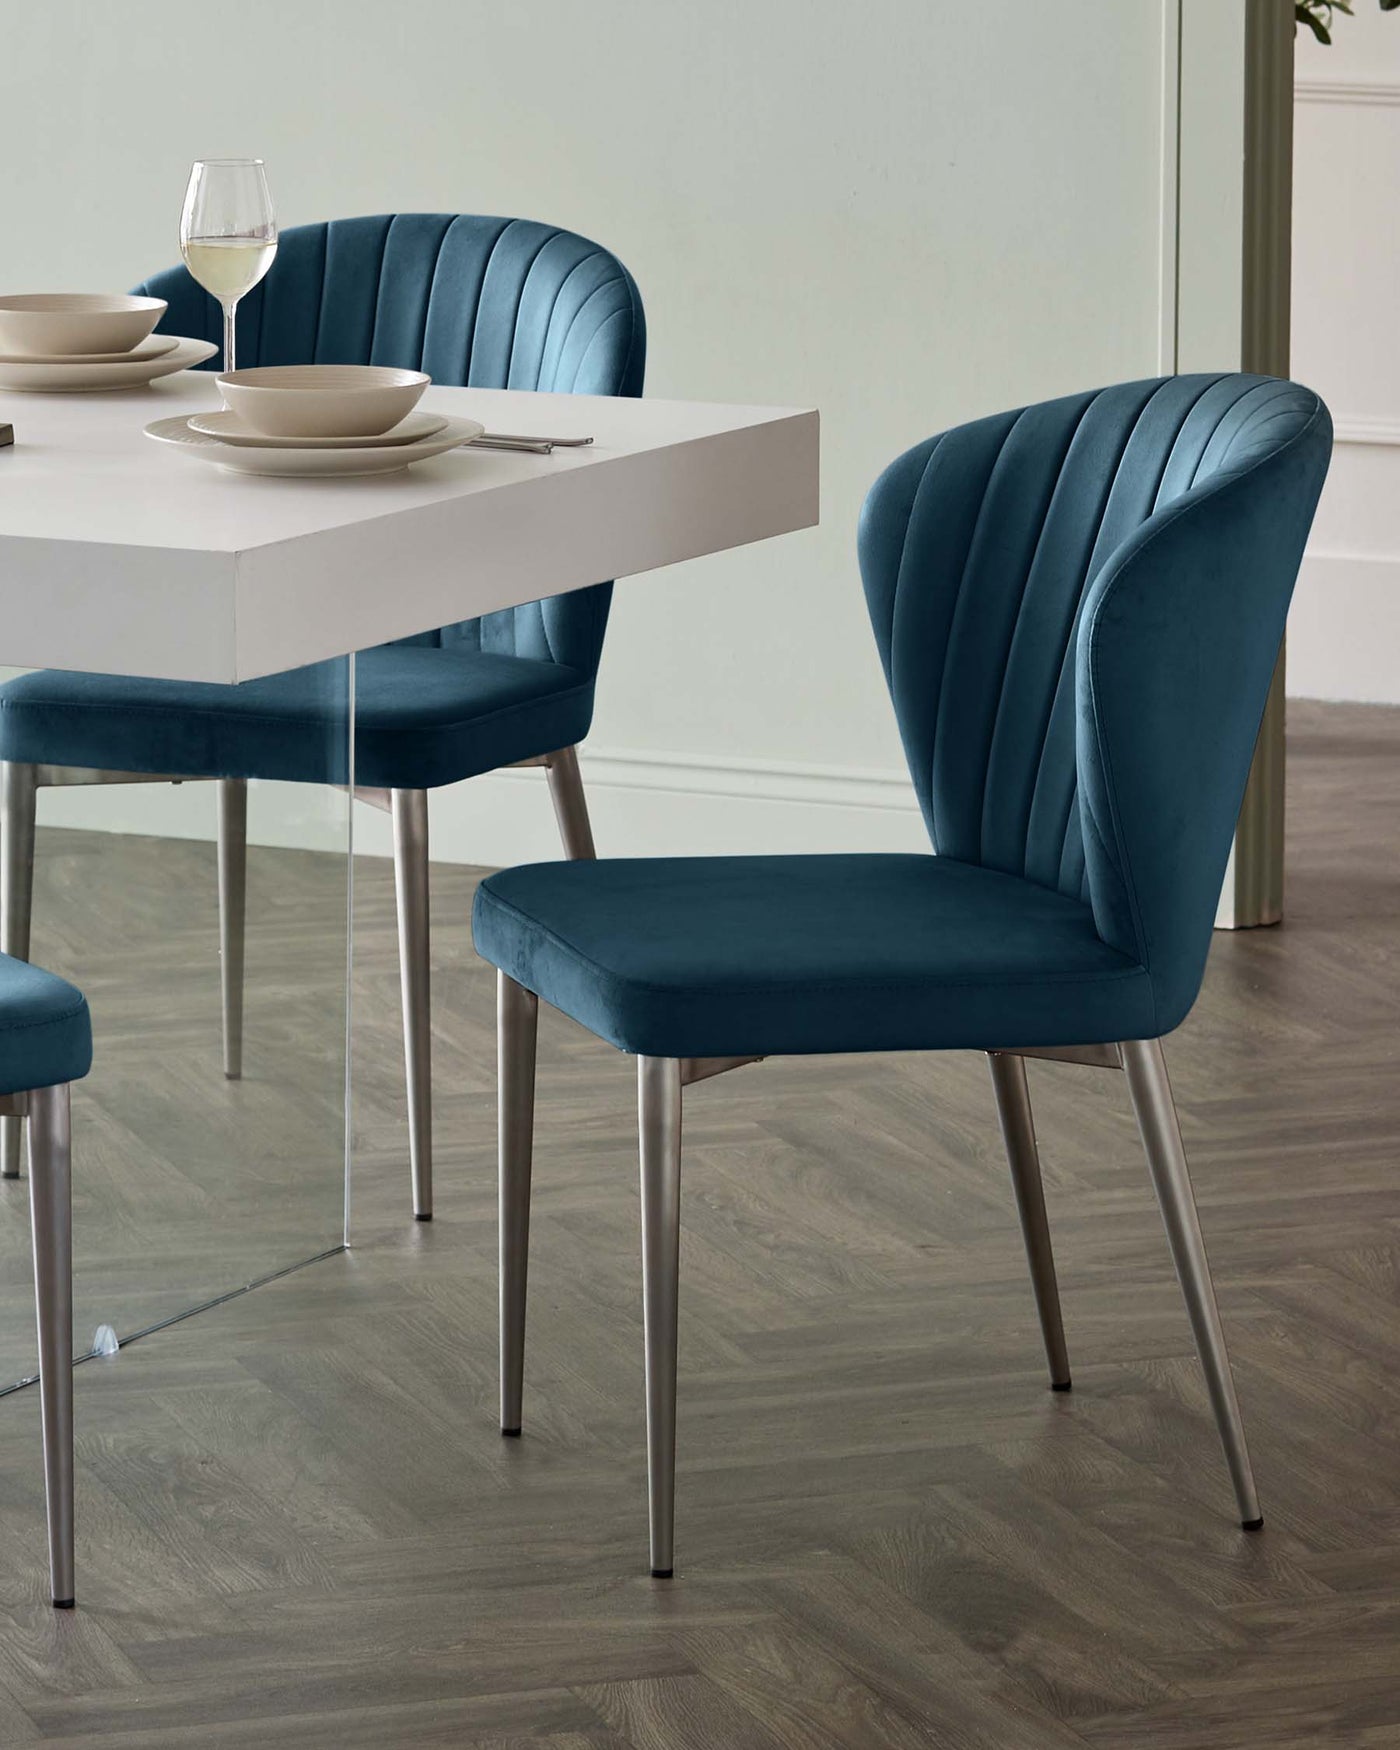 A contemporary dining room set featuring a white rectangular table with a simple, sleek design and two blue velvet upholstered chairs with a vertical channel-tufted backrest and cushioned seat, all supported by metallic silver legs.